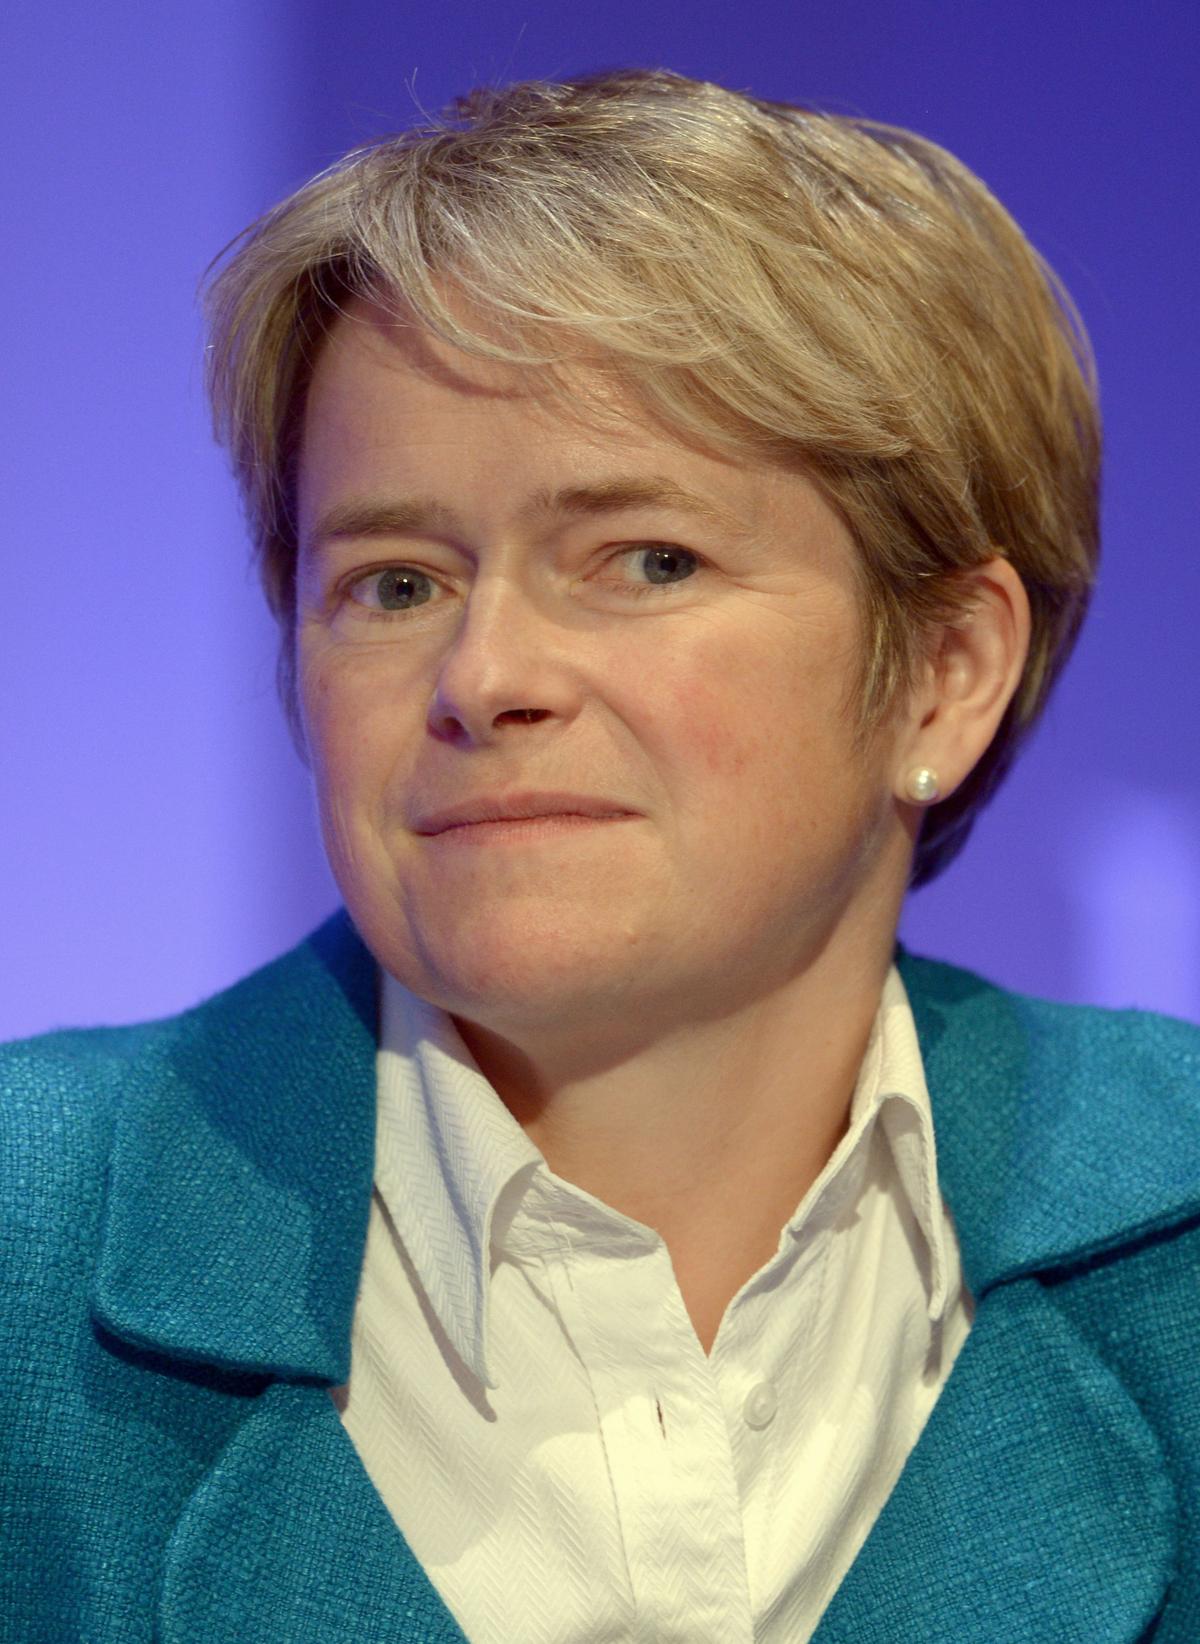 Dido Harding, chief executive of telecommunications company TalkTalk, on Oct. 3, 2014. Phone and Internet service provider Talk Talk said Friday that private data from its 4 million British customers may have been compromised in a "significant and sustained" cyberattack on its website, and Chief Executive Harding said "there is a risk that all of our customers' personal data has been accessed," including credit card and bank details. (Anthony Devlin/AP)